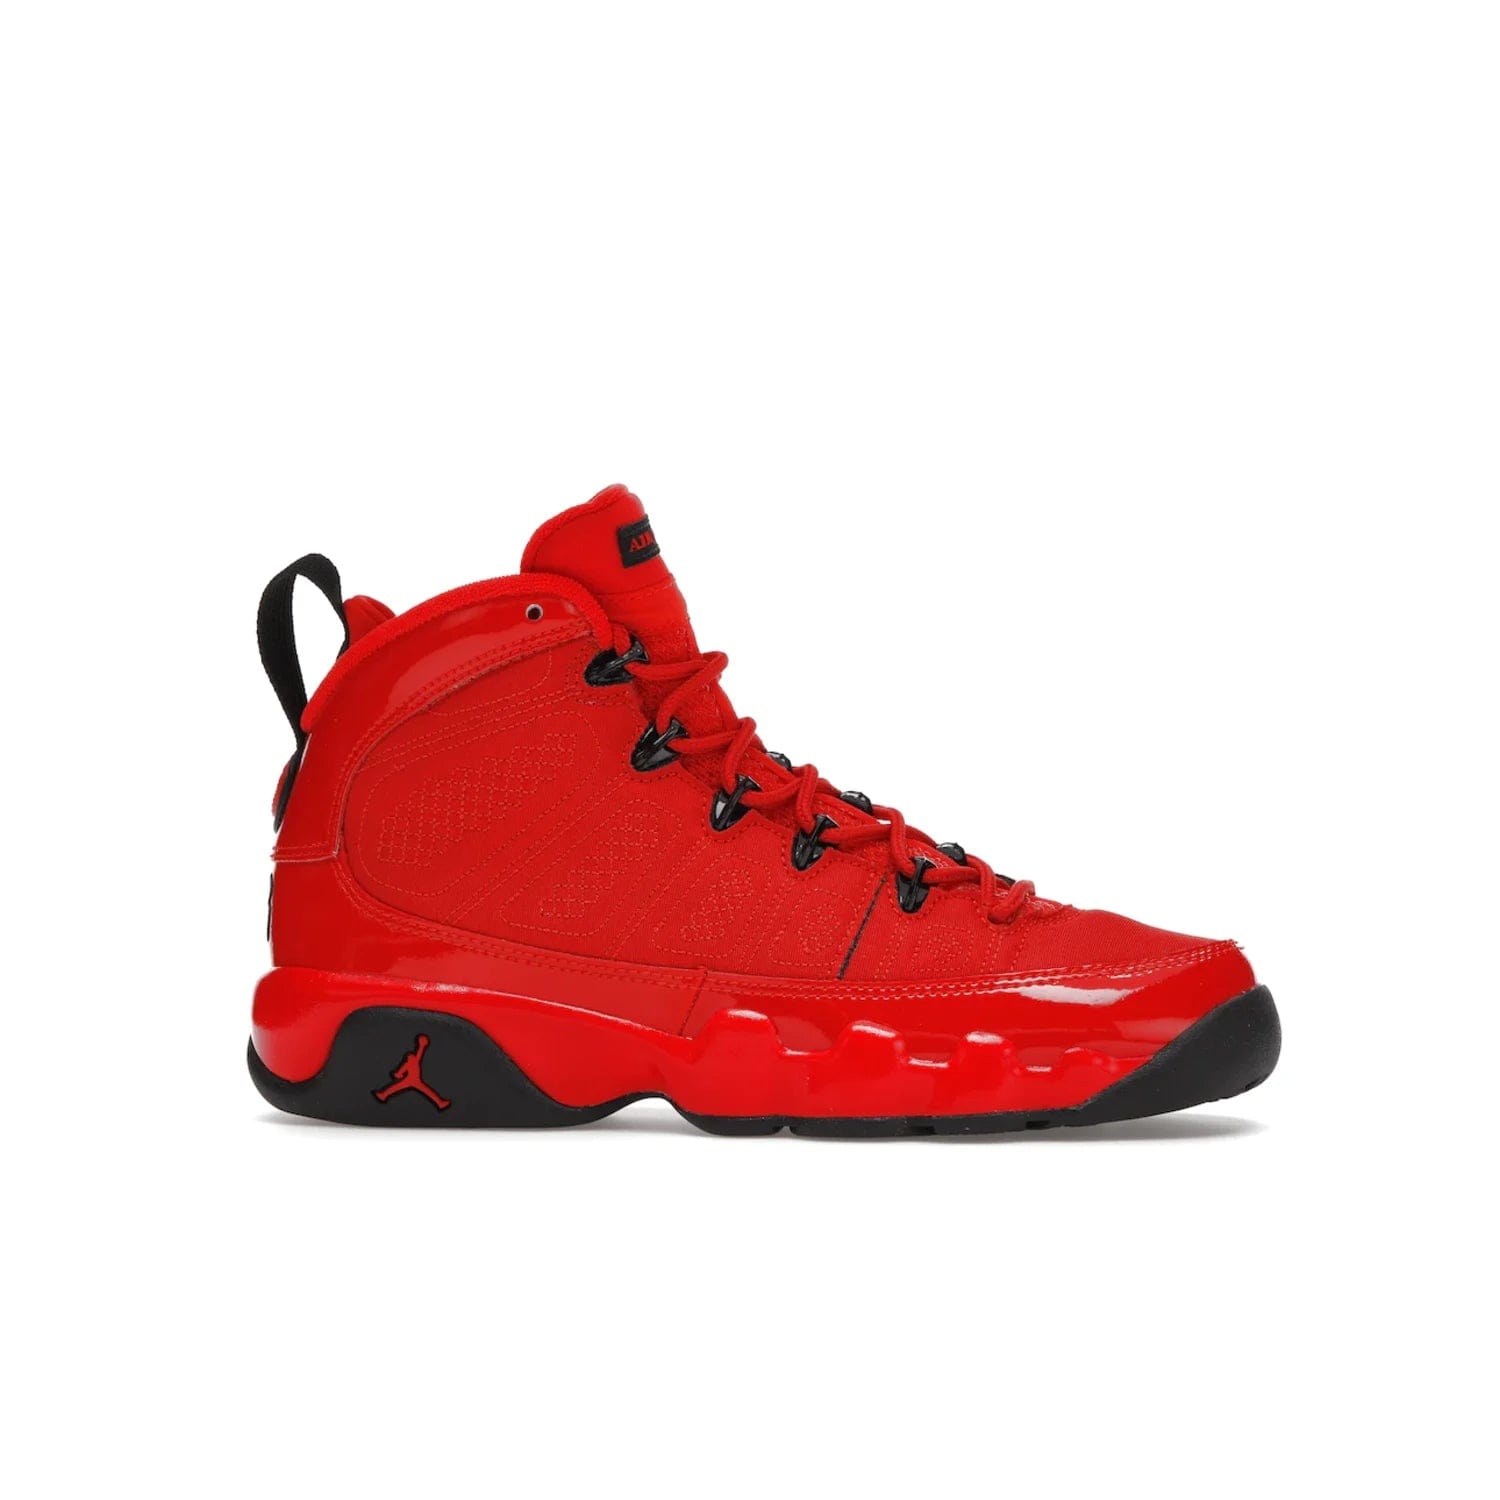 Jordan 9 Retro Chile Red (GS) - Image 2 - Only at www.BallersClubKickz.com - Introducing the Air Jordan 9 Retro Chile Red (GS), a vintage 1993 silhouette with fiery colorway. Features quilted side paneling, glossy patent leather, pull tabs, black contrast accents, and foam midsole. Launching May 2022 for $140.